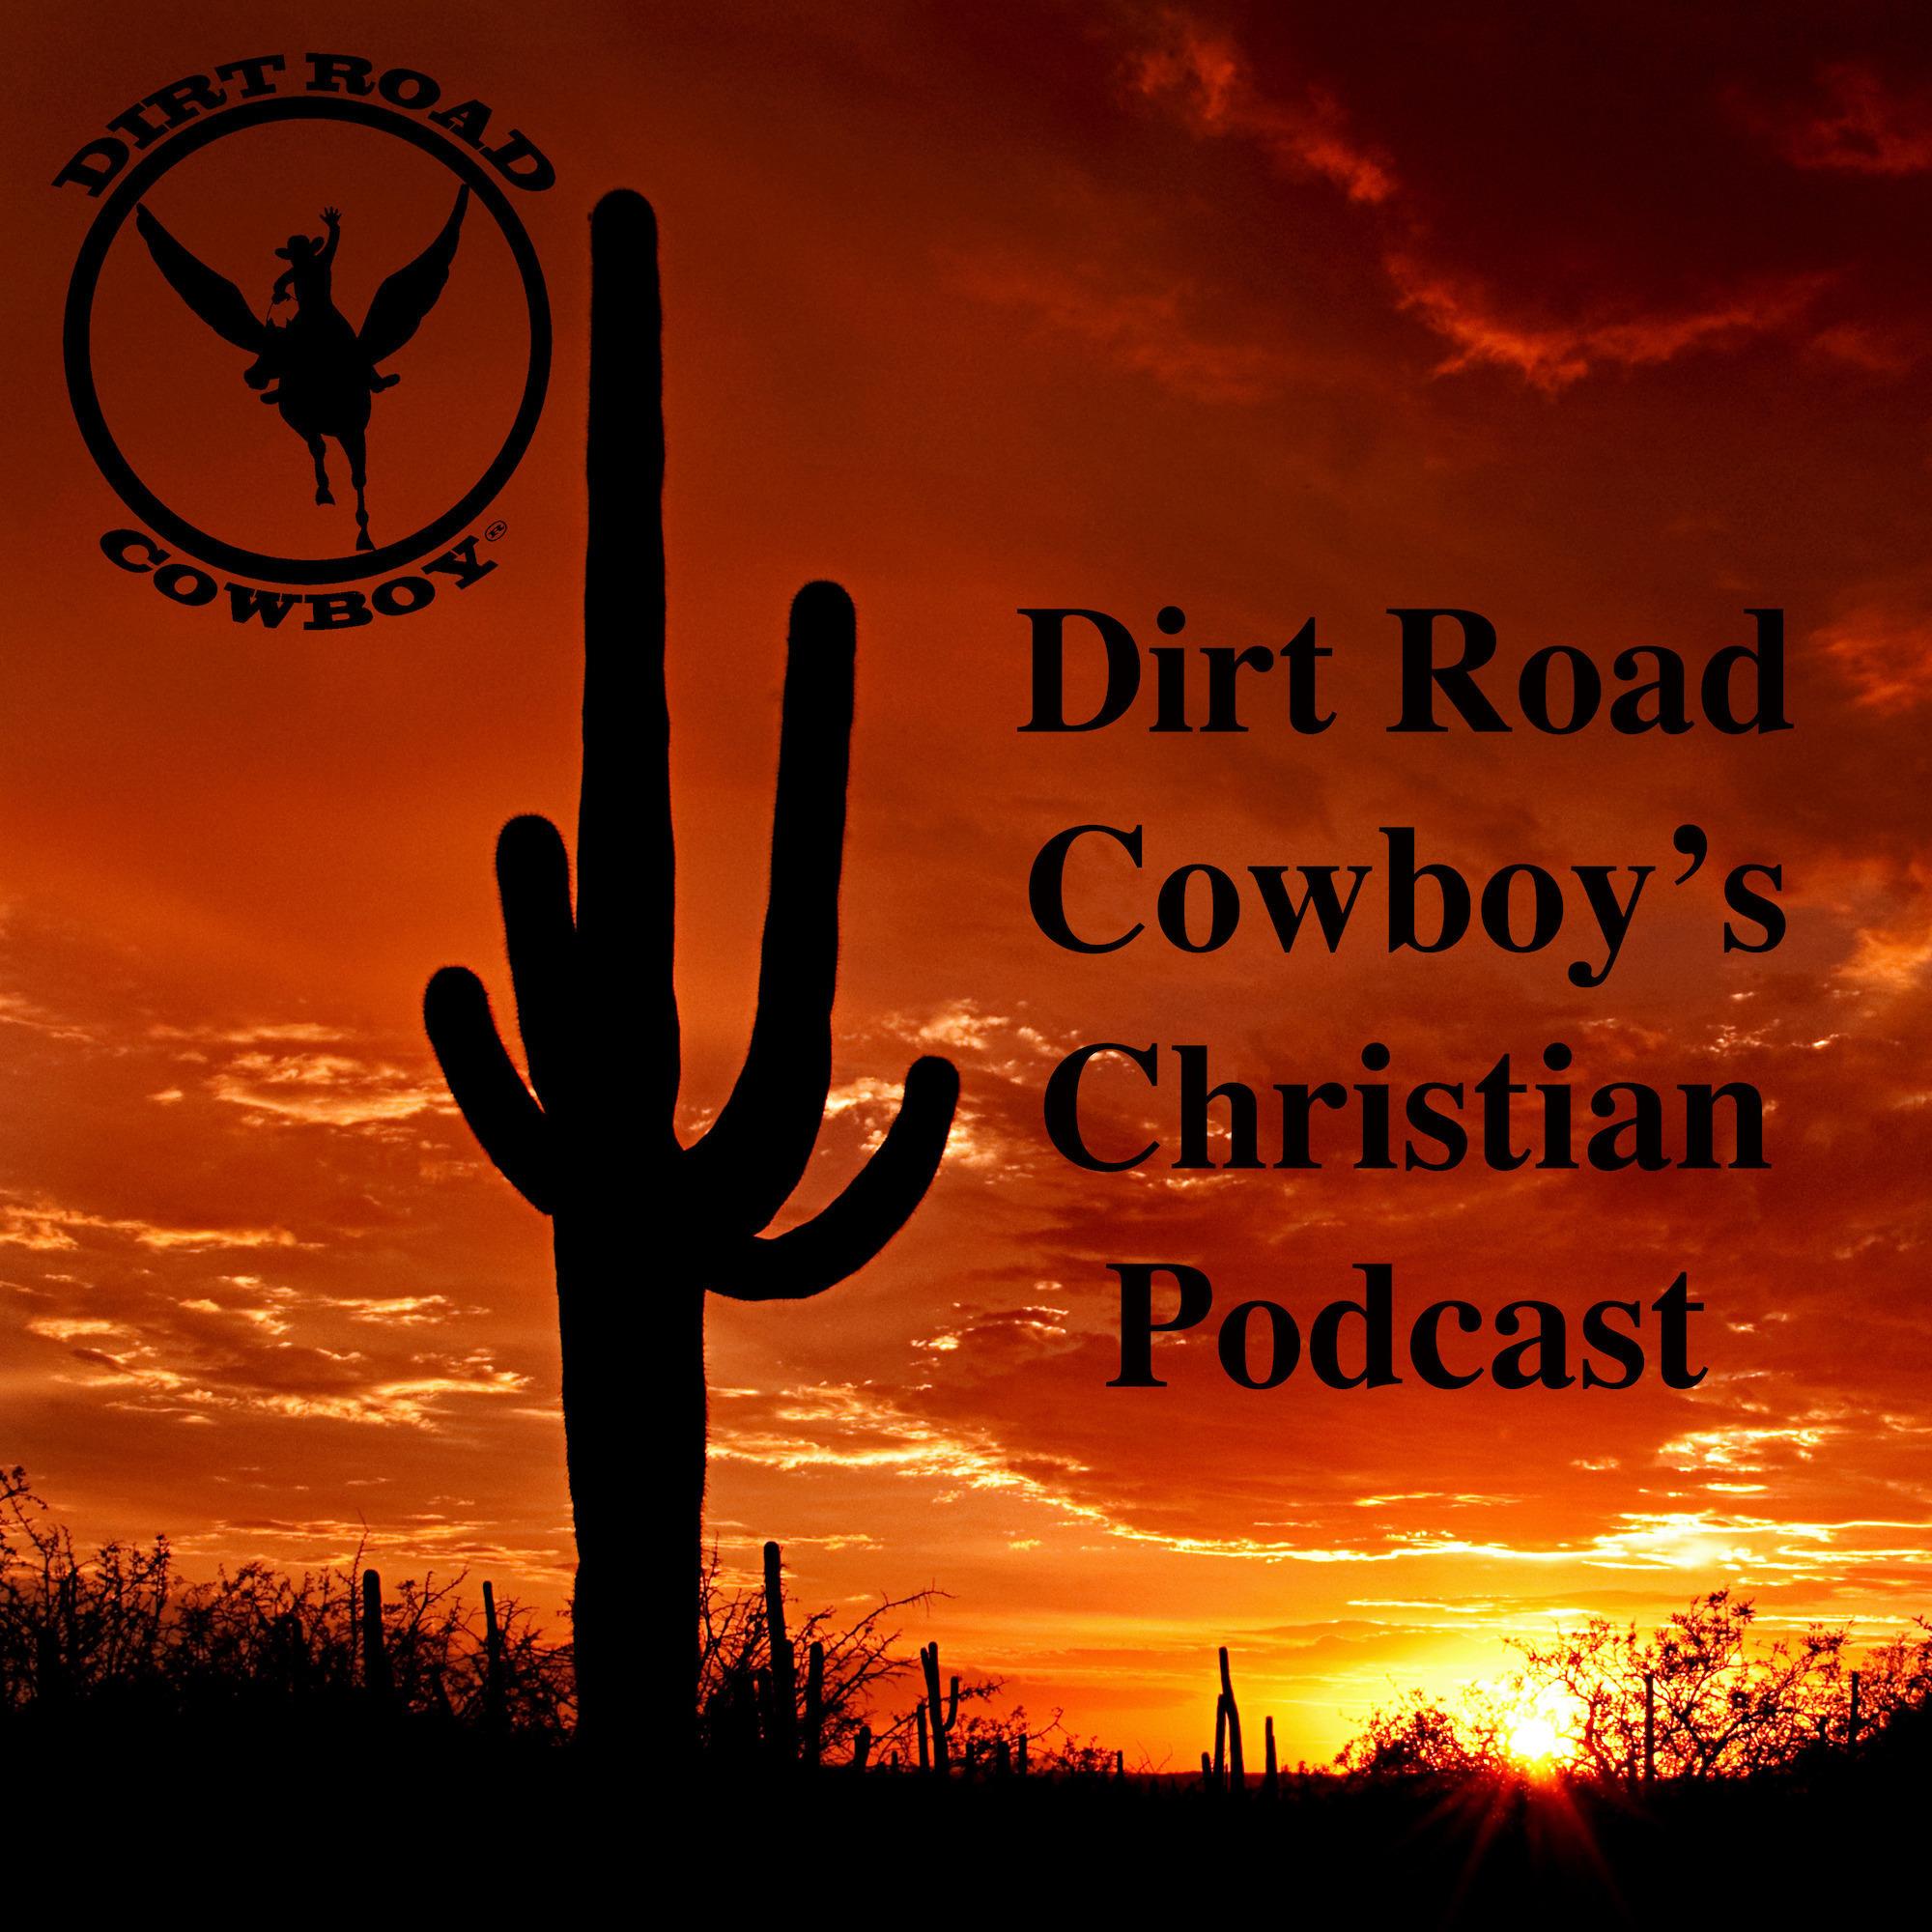 Dirt Road Cowboy's Christian Podcast